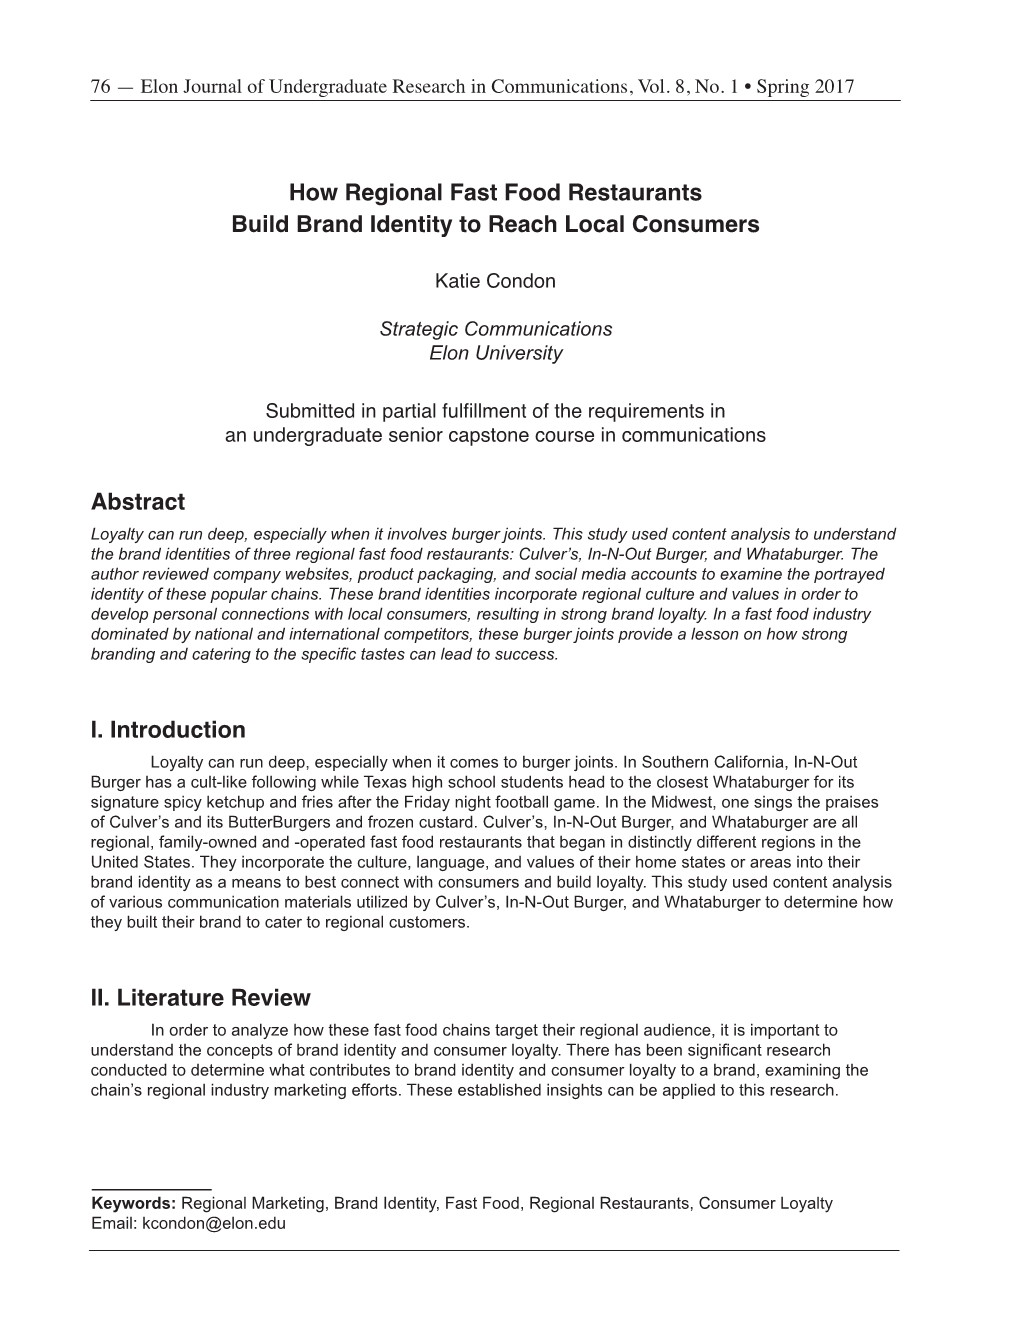 How Regional Fast Food Restaurants Build Brand Identity to Reach Local Consumers Abstract I. Introduction II. Literature Review